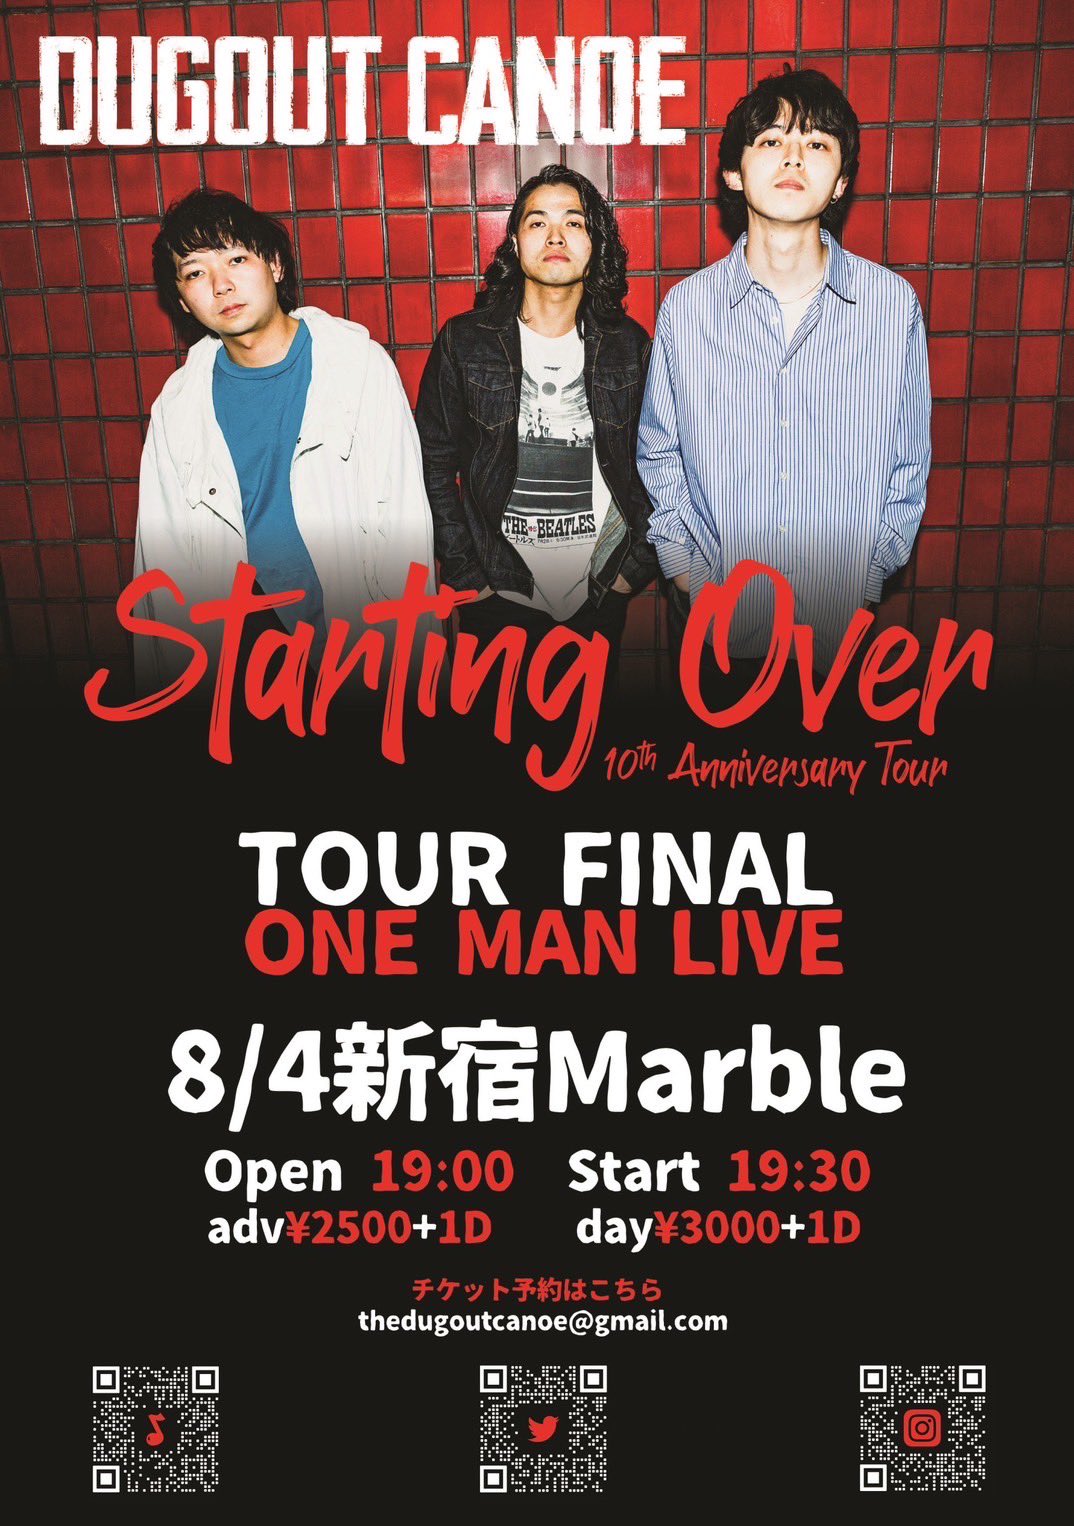 DUGOUT CANOE 10th Anniversary Tour「Starting Over」Tour Final ONEMAN LIVE